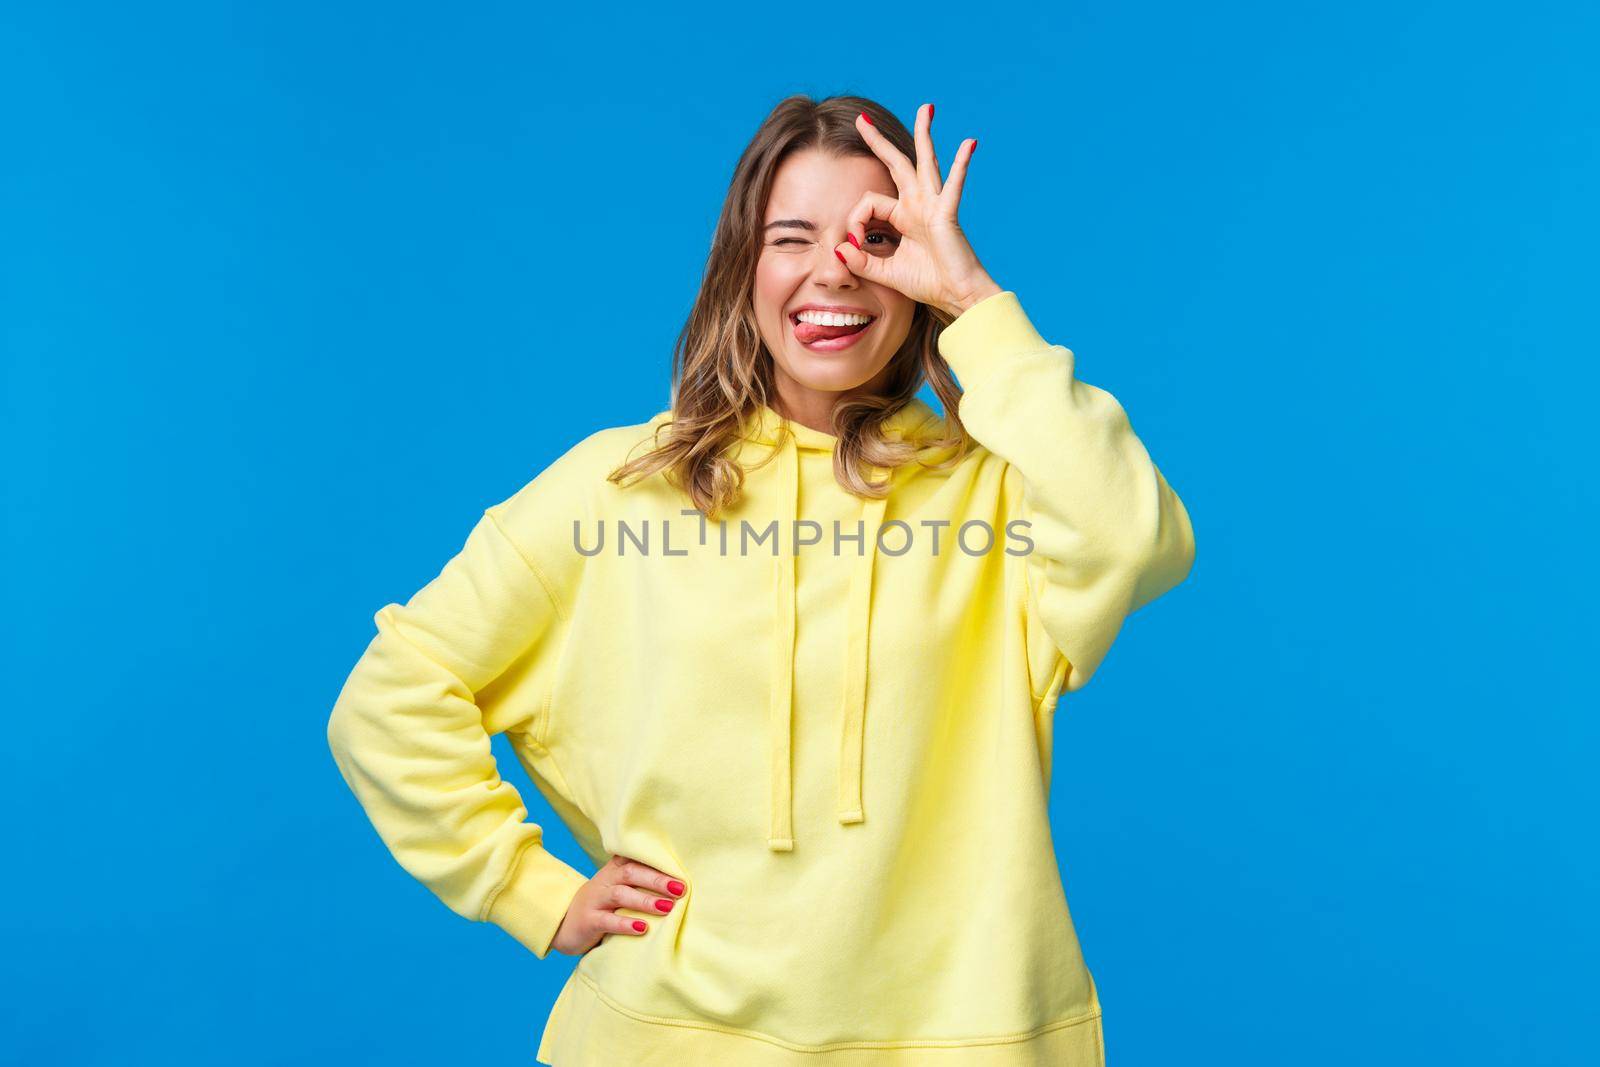 No problem, stay relaxed. Carefree and chill good-looking blond girl vibing, assure all okay nothing worry about, show tongue wink and look through okay gesture, blue background.